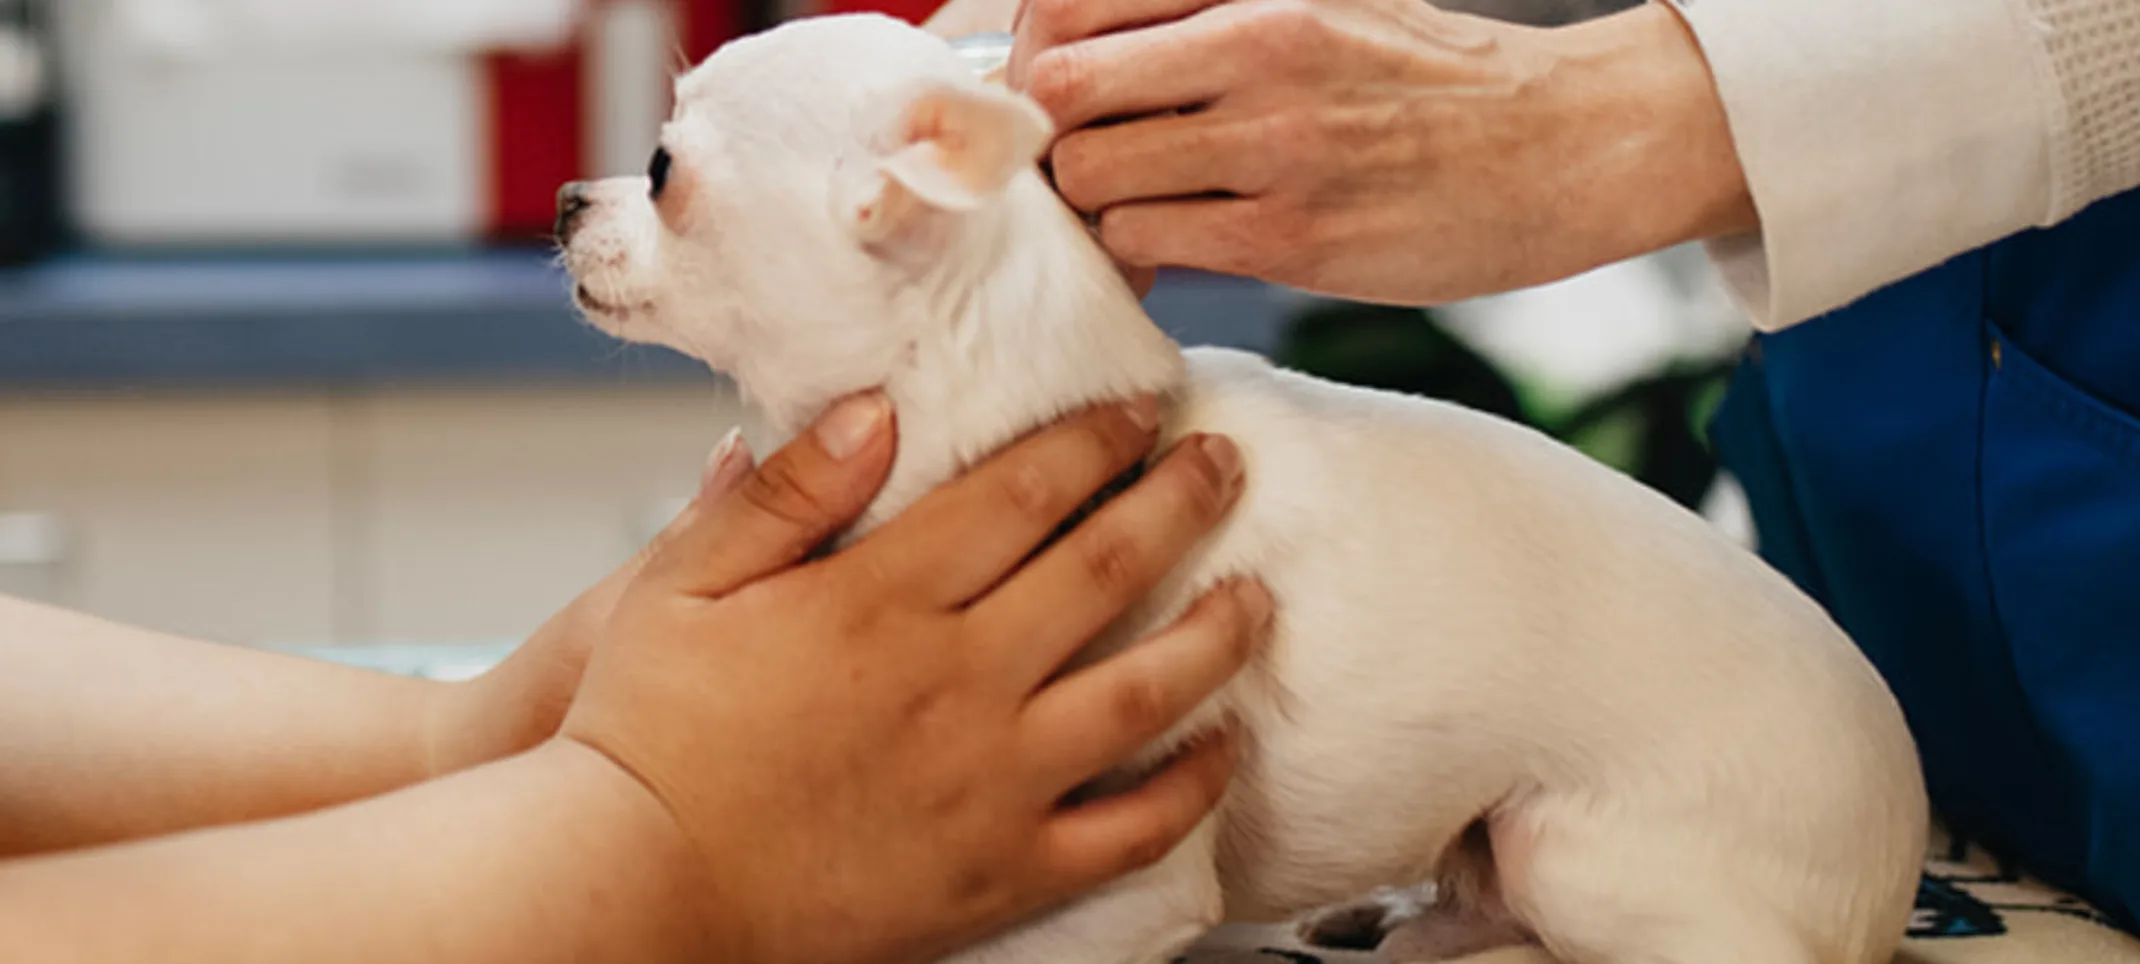 Two staff members caring for a small white Chihuahua dog